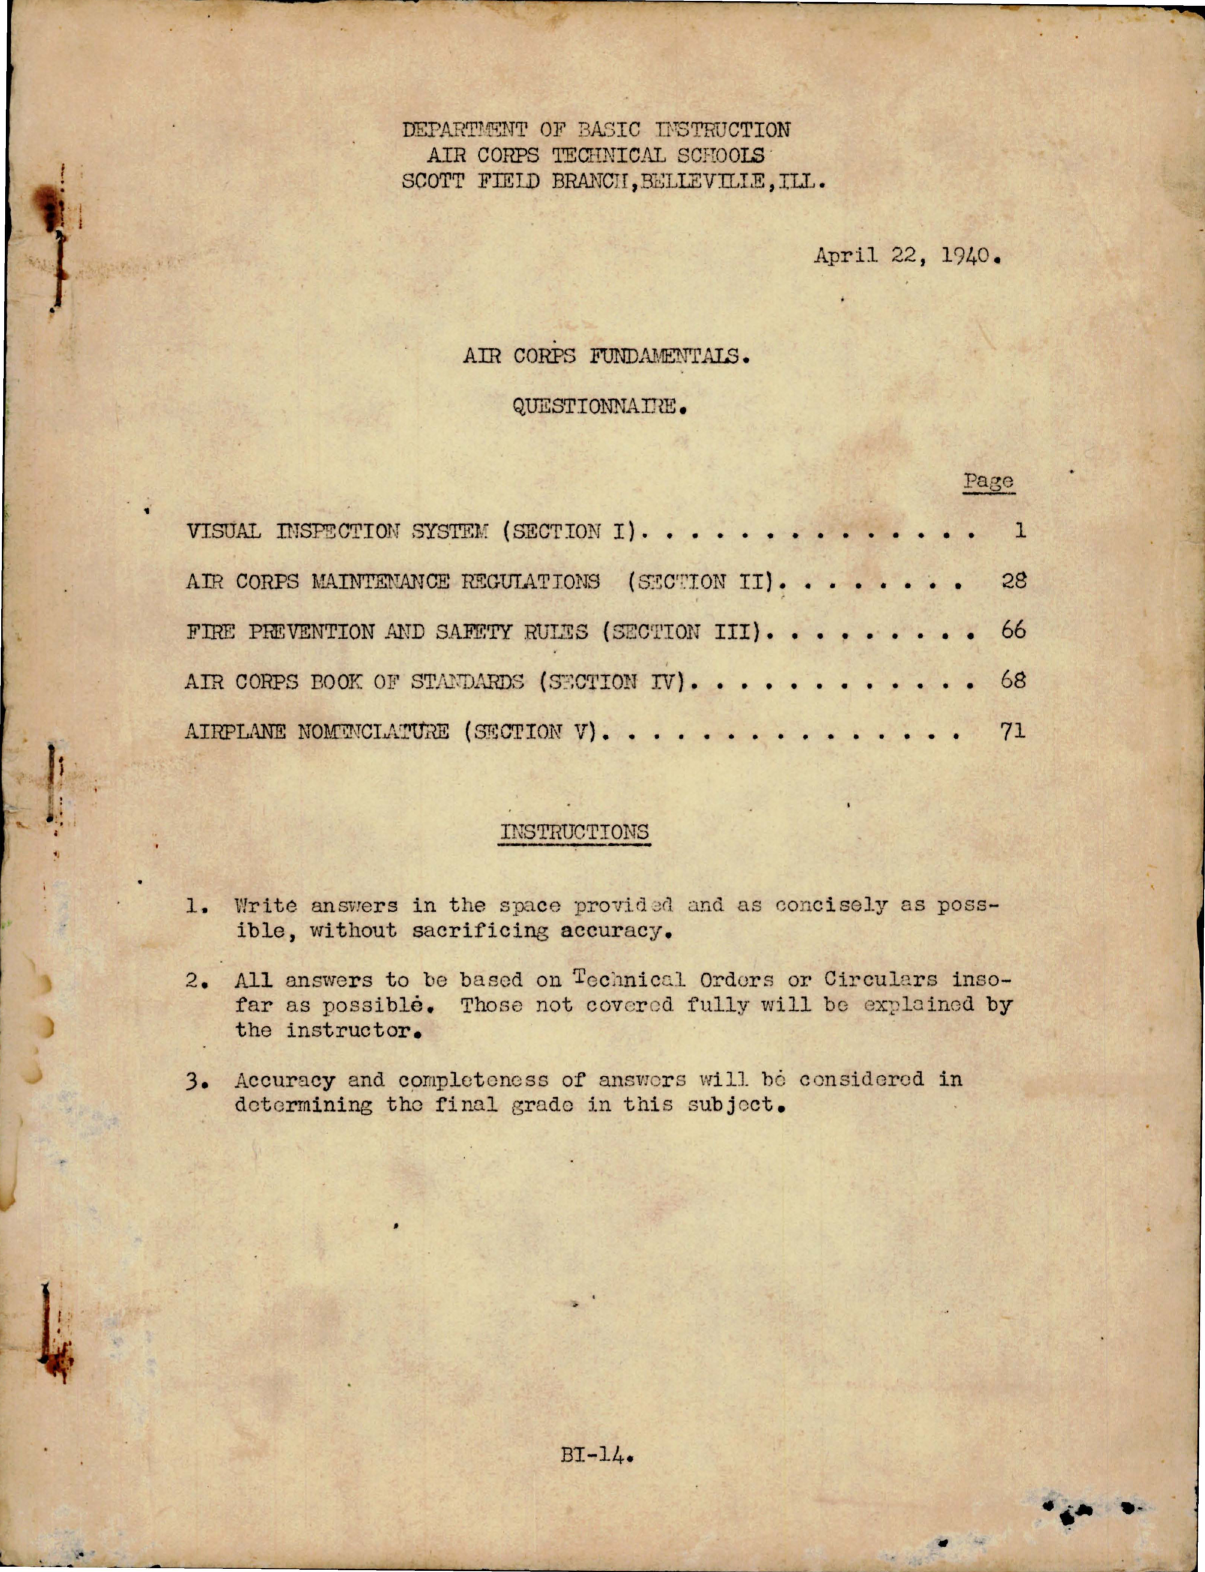 Sample page 1 from AirCorps Library document: Questionnaire for Air Corps Fundamentals